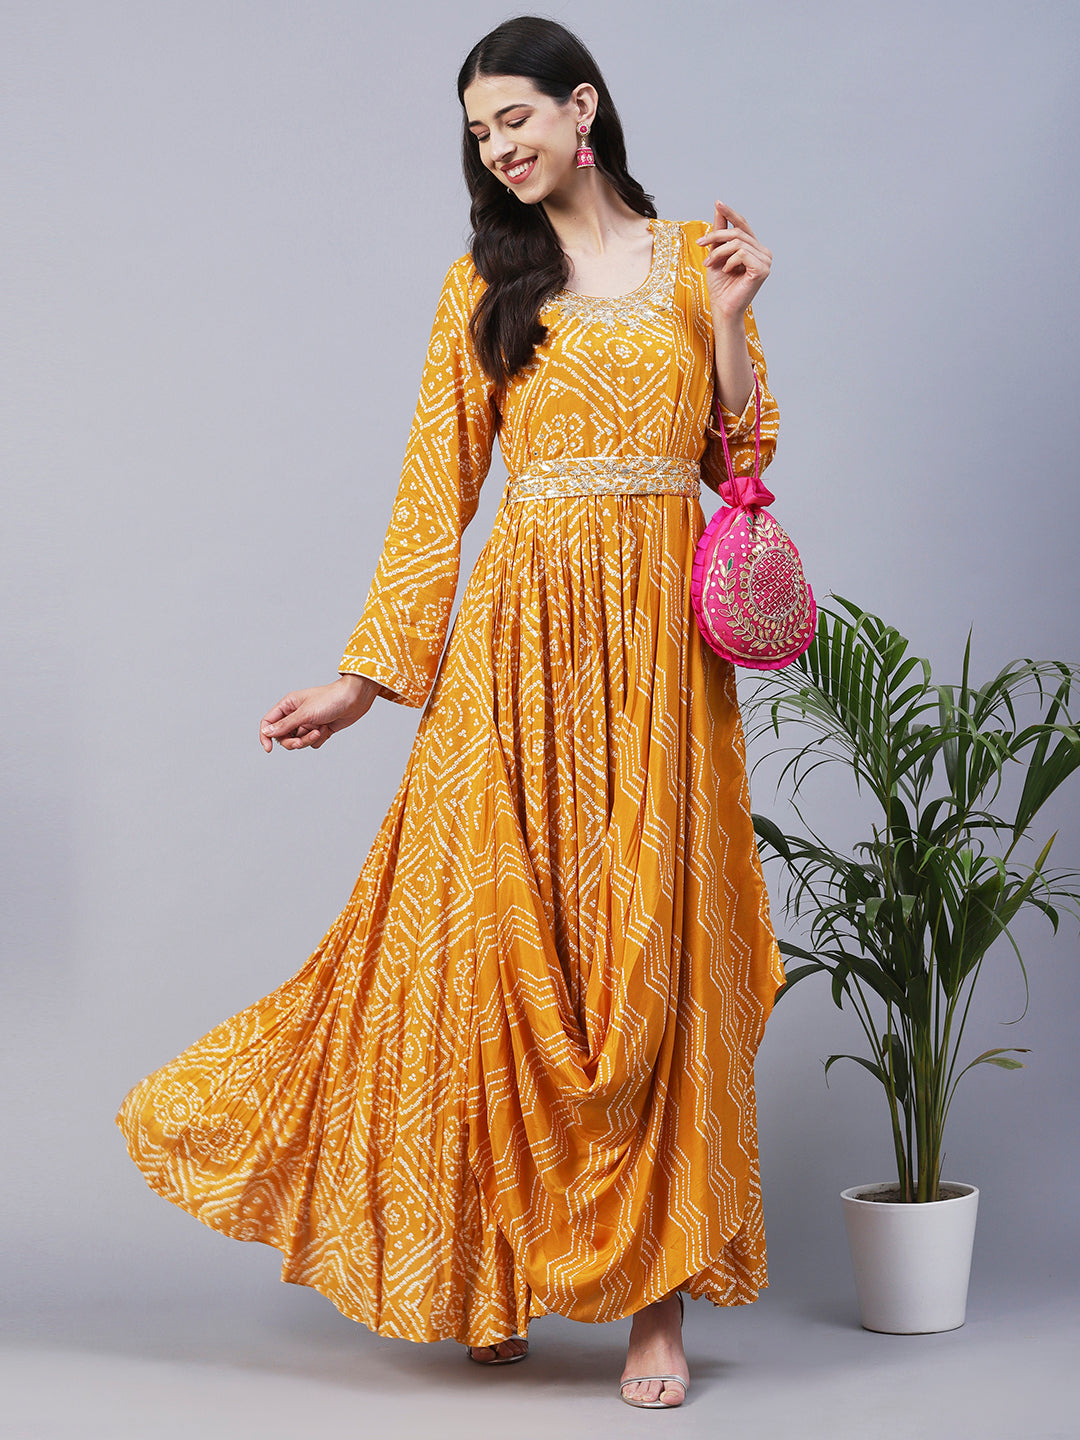 Bandhani Printed & Hand Embroidered Fit & Flare Maxi Dress with Belt - Mustard